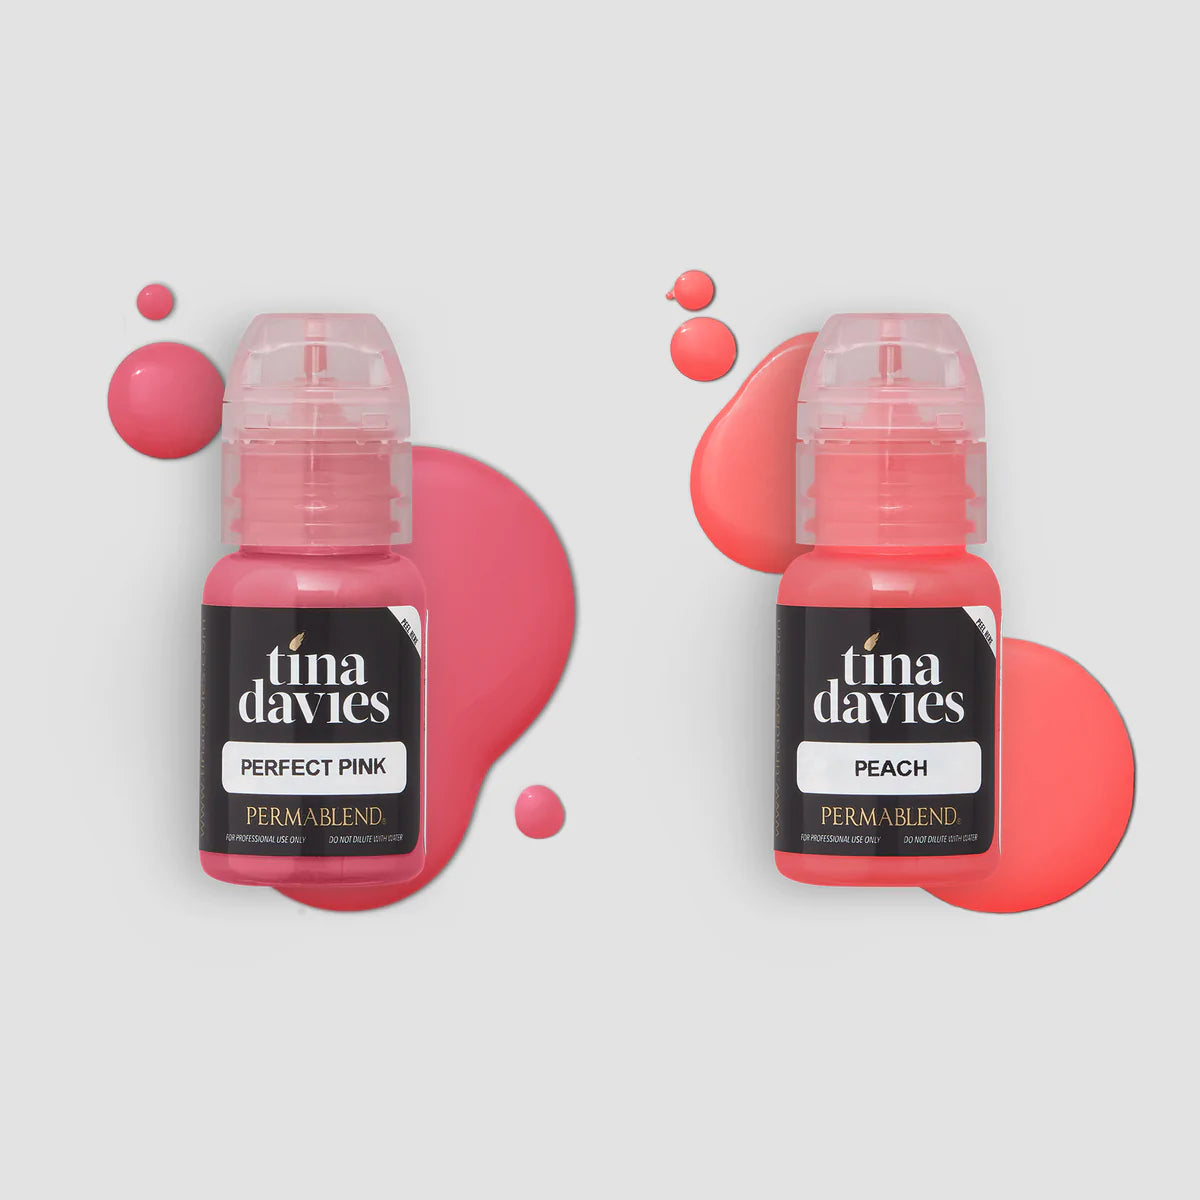 Two tina davies lip pigments in bottles left is perfect pink and right is peach. Bottle are clear so you can see the vibrant color through them.